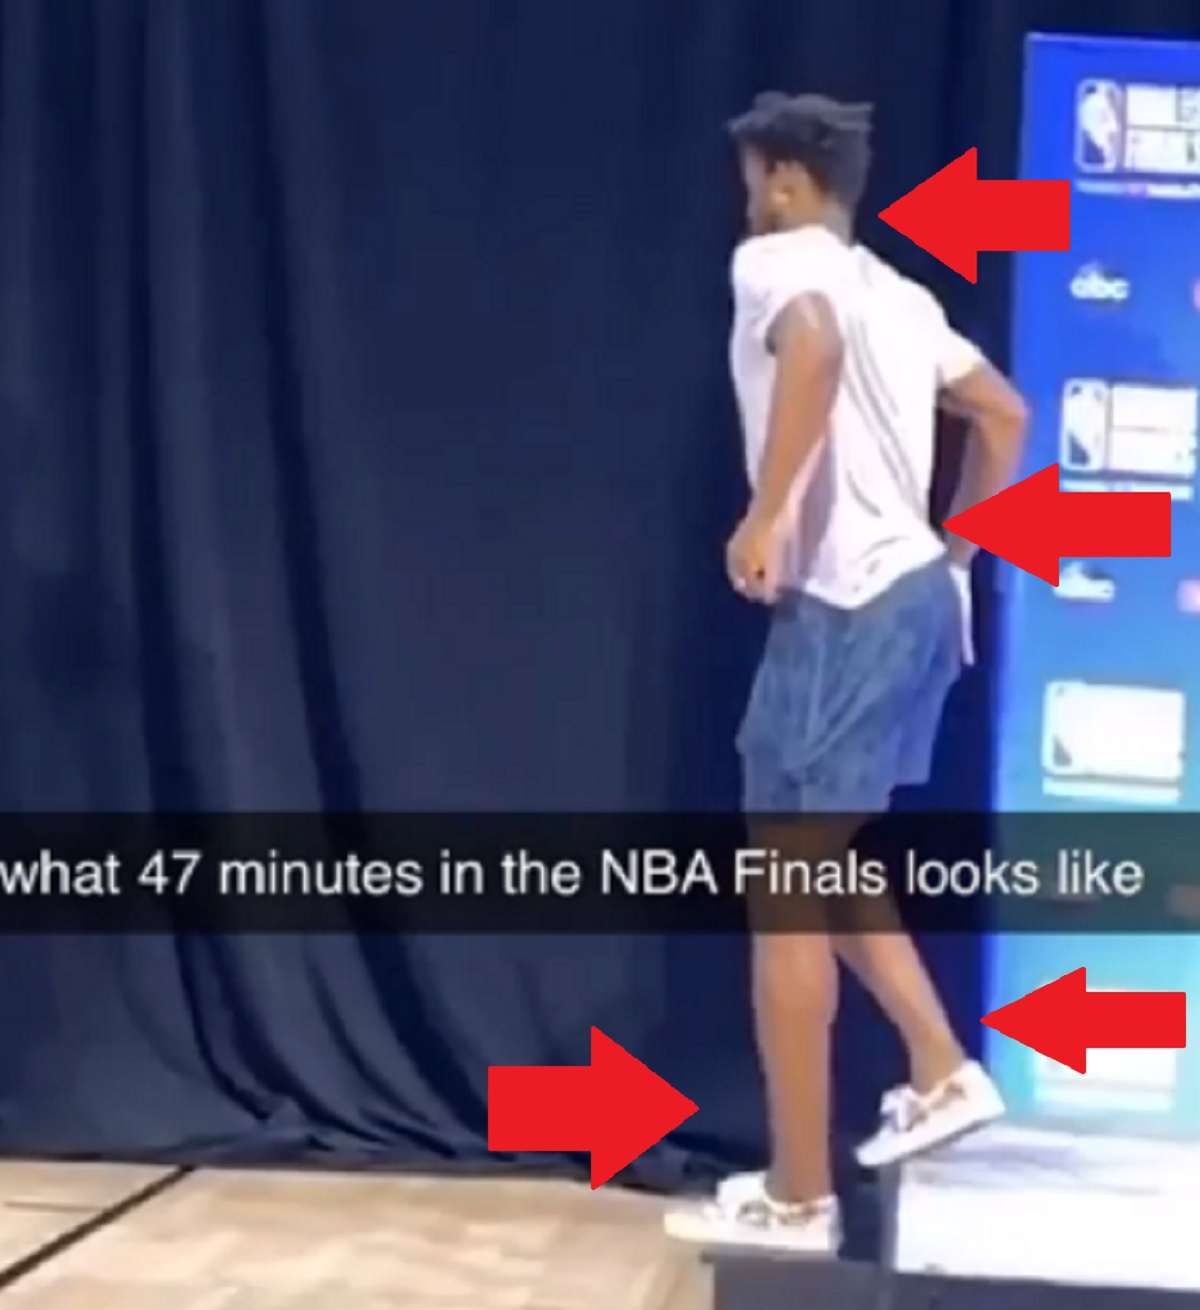 Limping Jimmy Butler Barely Walking after Playing 47 Minutes in Game 5 of NBA Finals Heat vs Lakers Goes Viral